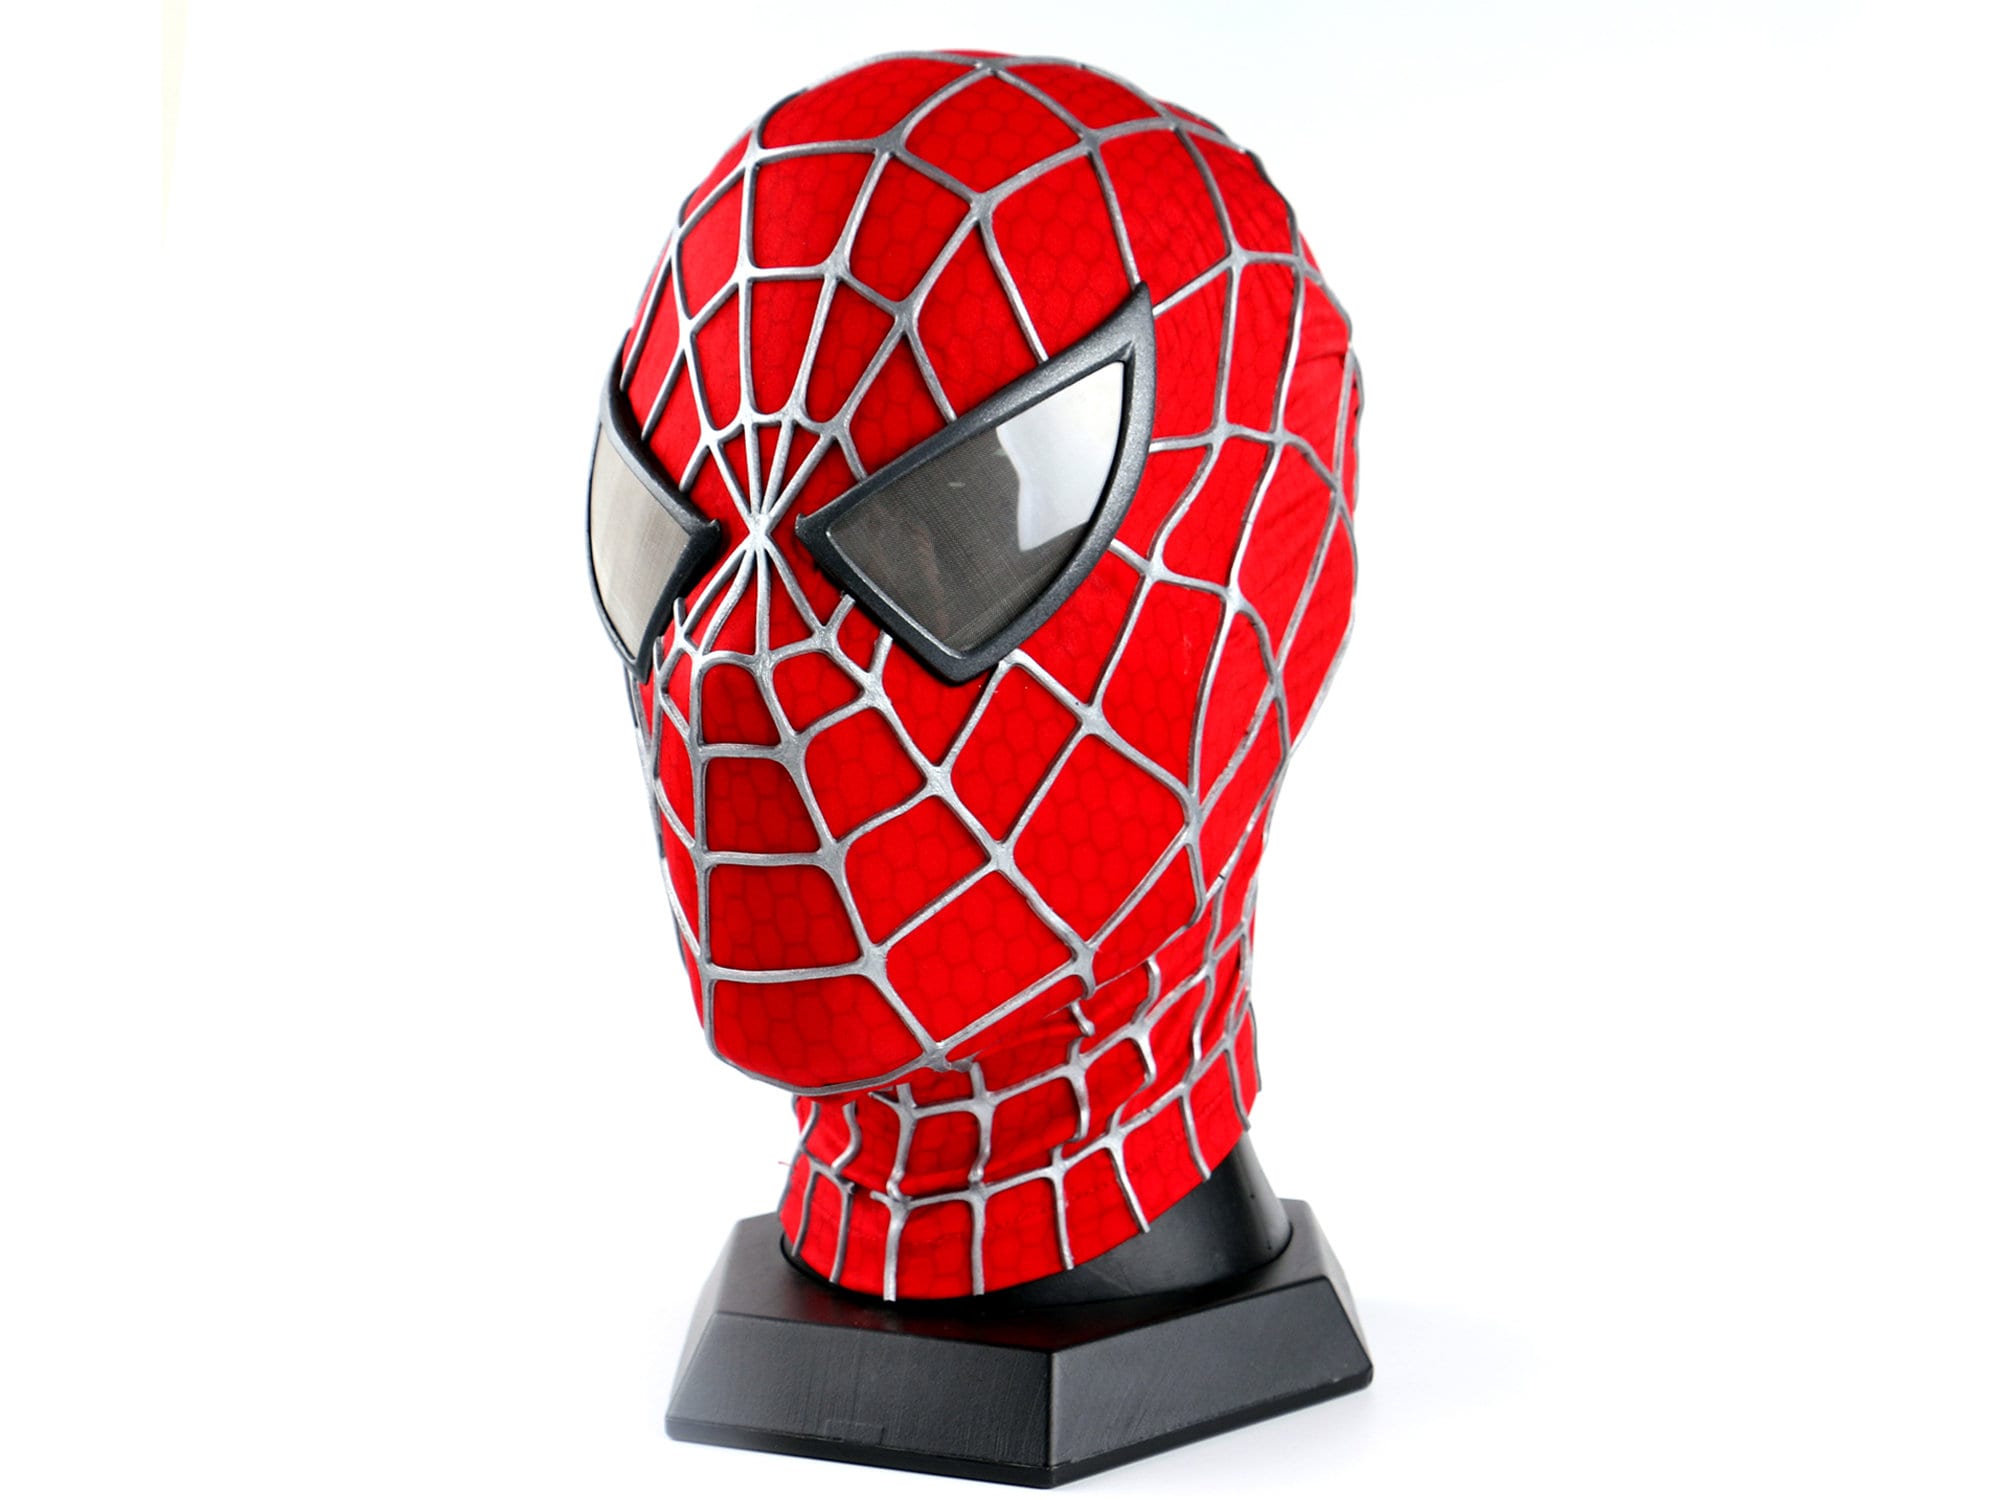 Black Spiderman Mask Cosplay Sam Raimi Spiderman Mask Adults With Faceshell  & 3D Rubber Web, Wearable Movie Prop Replica 